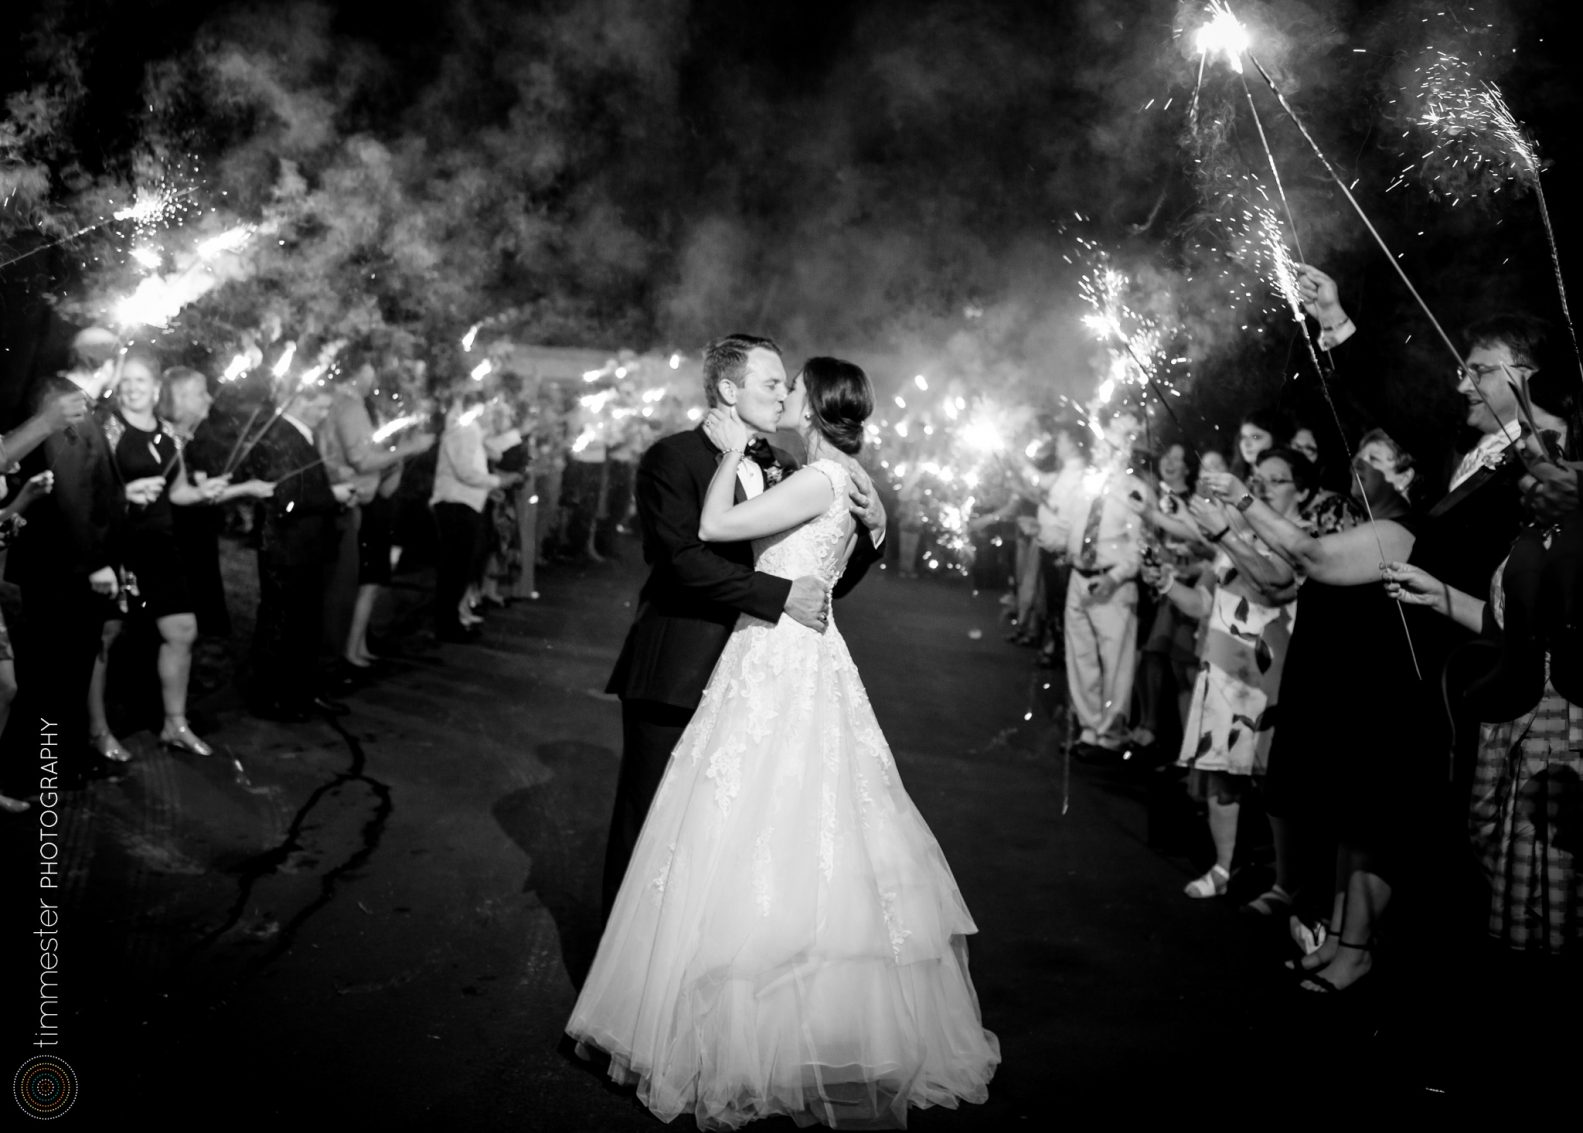 Sparkler exit for the bride and groom at their private home reception in Washington, DC.